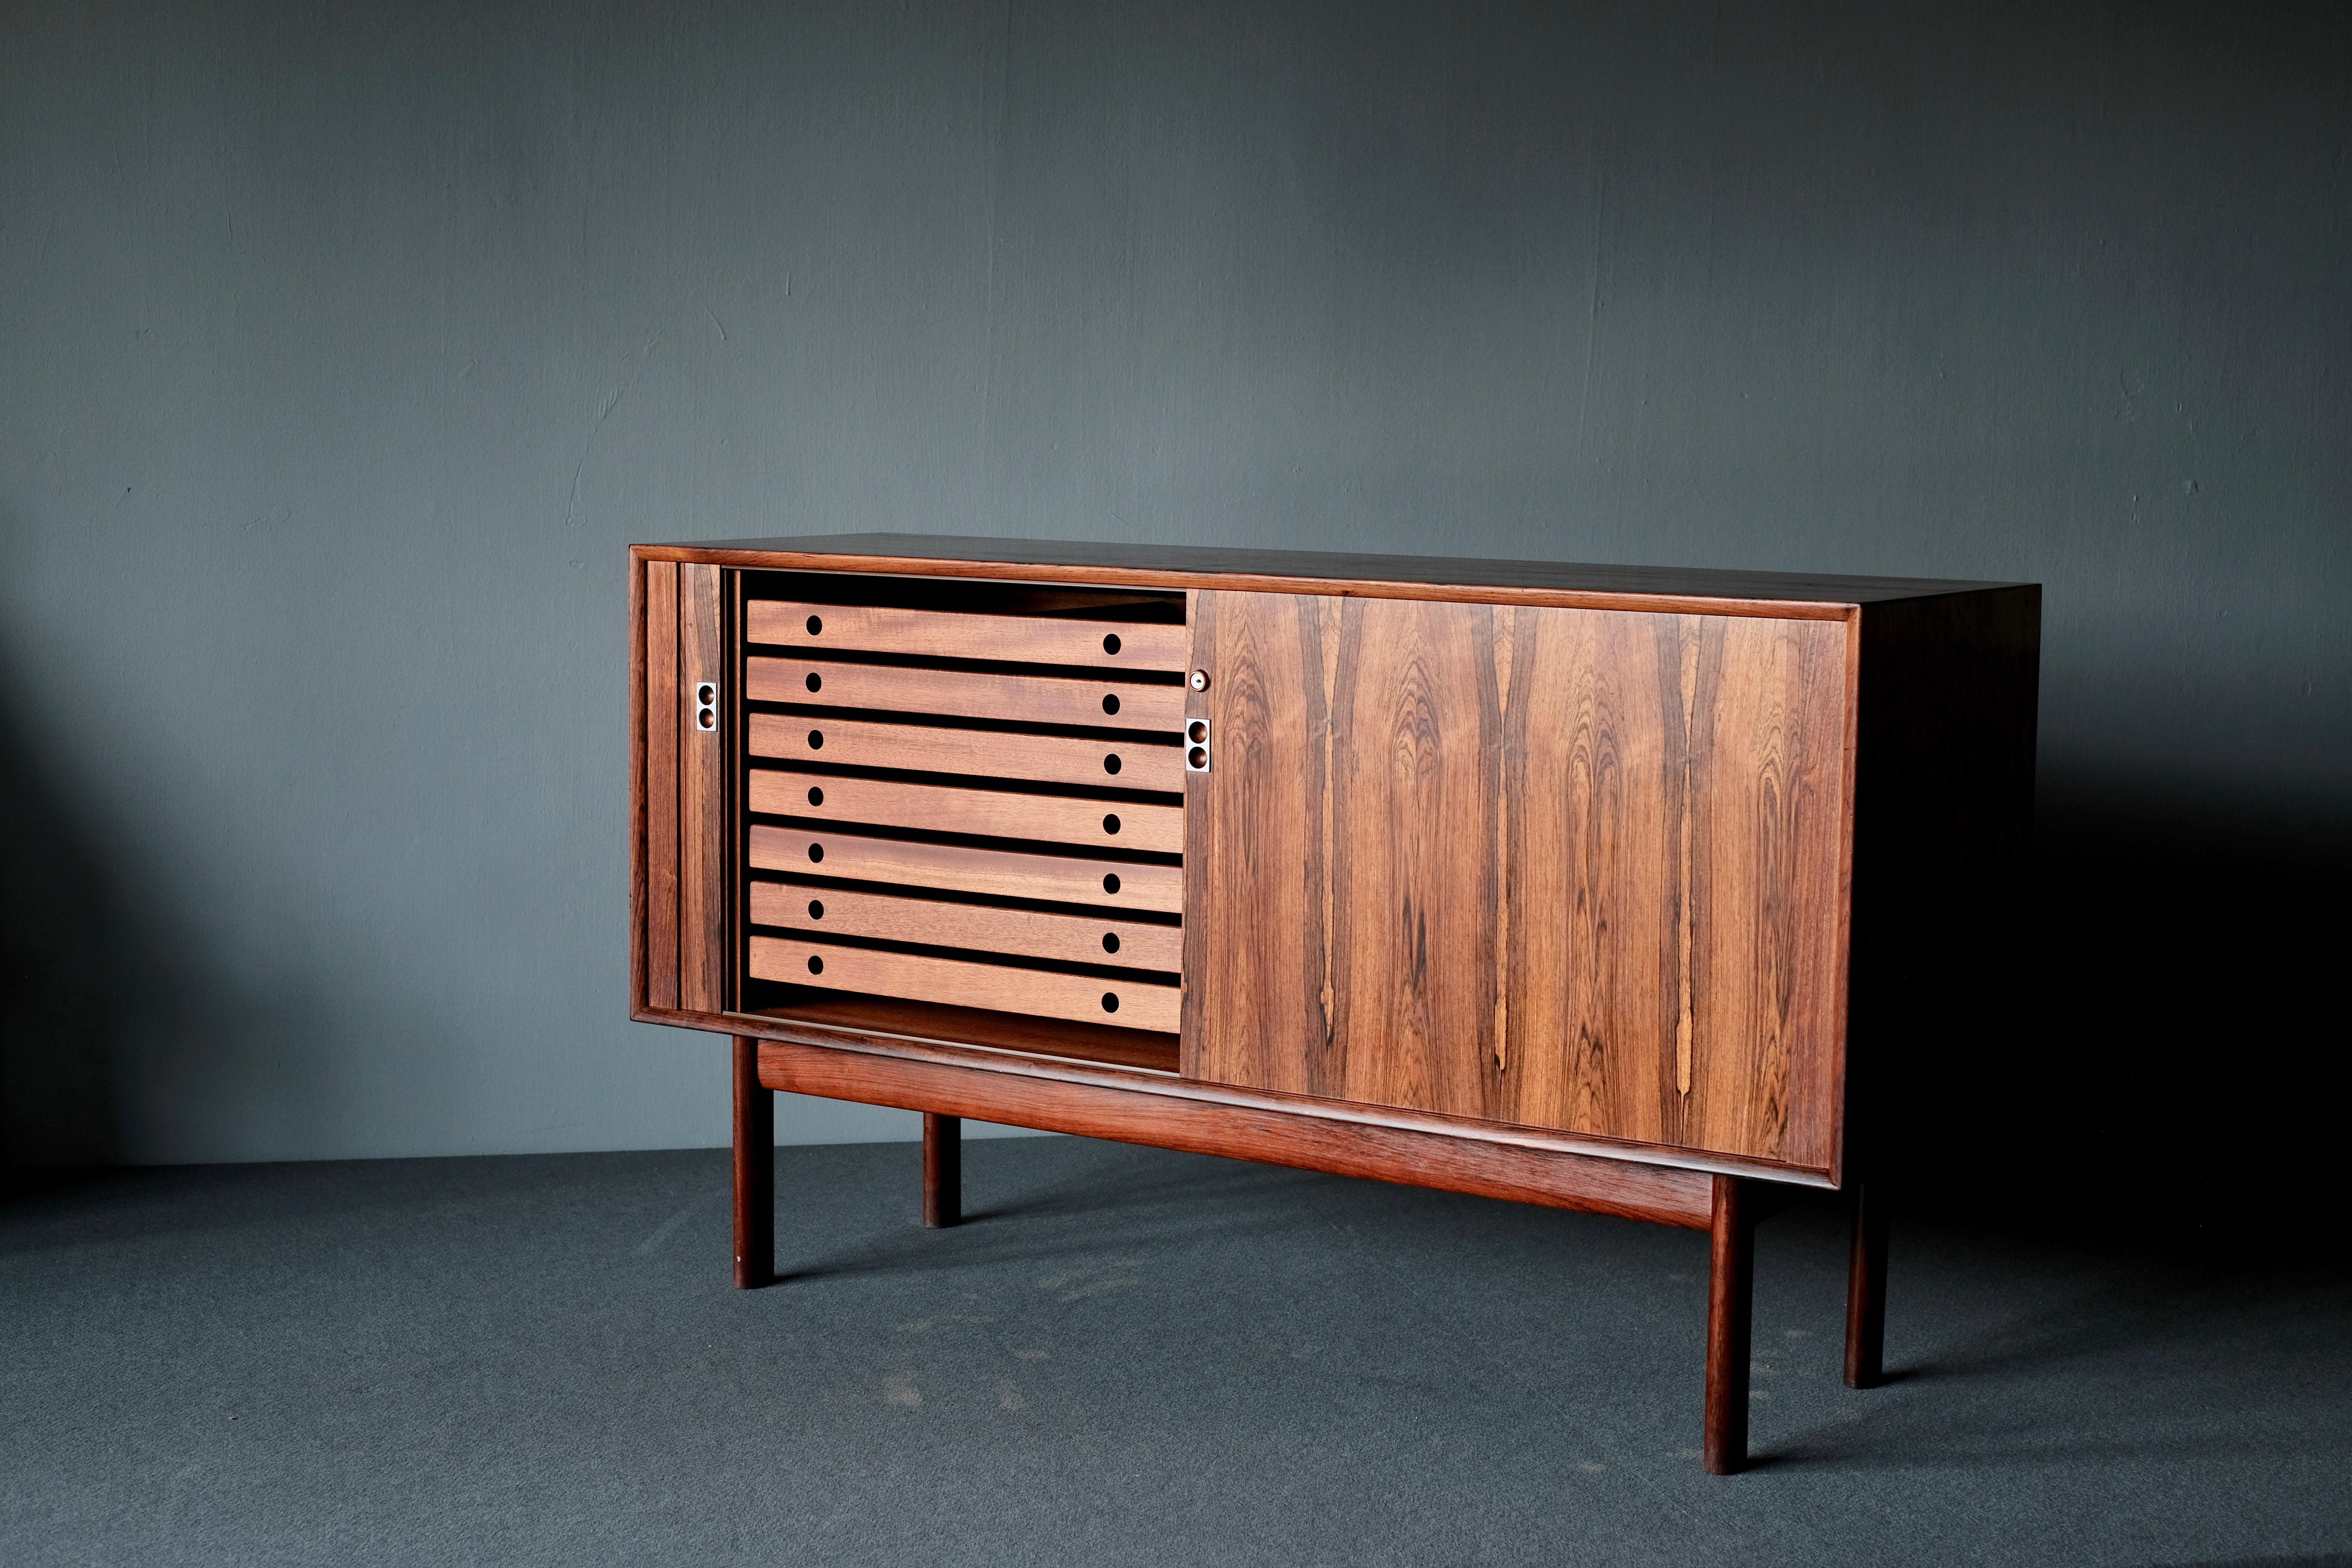 Sideboard by Arne Vodder for Sibast Mobler. It is in wonderfully patinated rosewood. The front has two ingenious tambour doors, enclosing trays and shelves. The handles are in steel. This Vodder sideboard with its modernism and perfect proportions